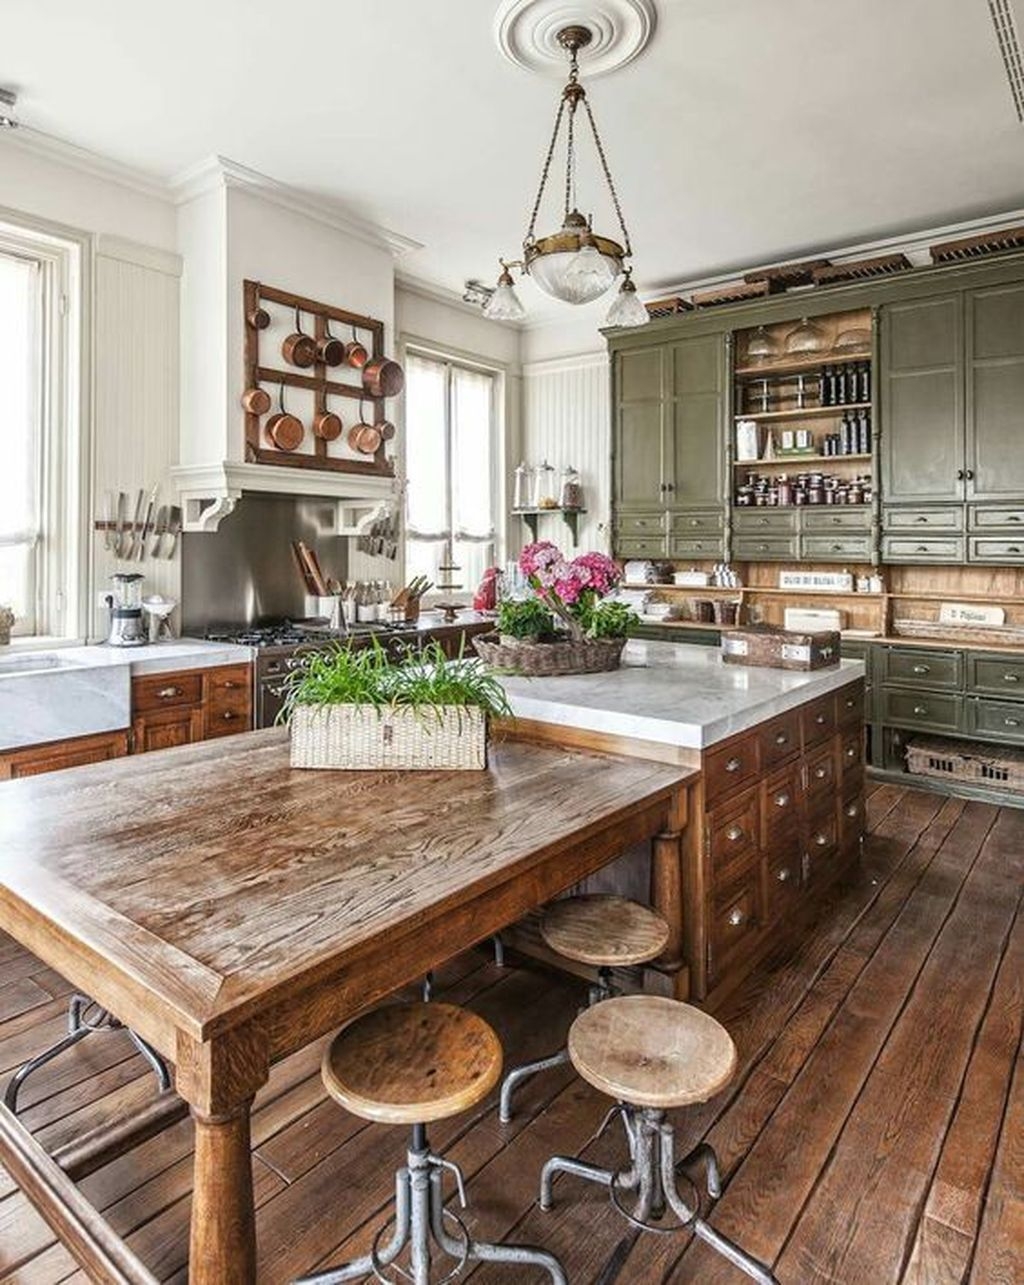 Rustic Farmhouse Kitchen Ideas To Get Traditional Accent 16